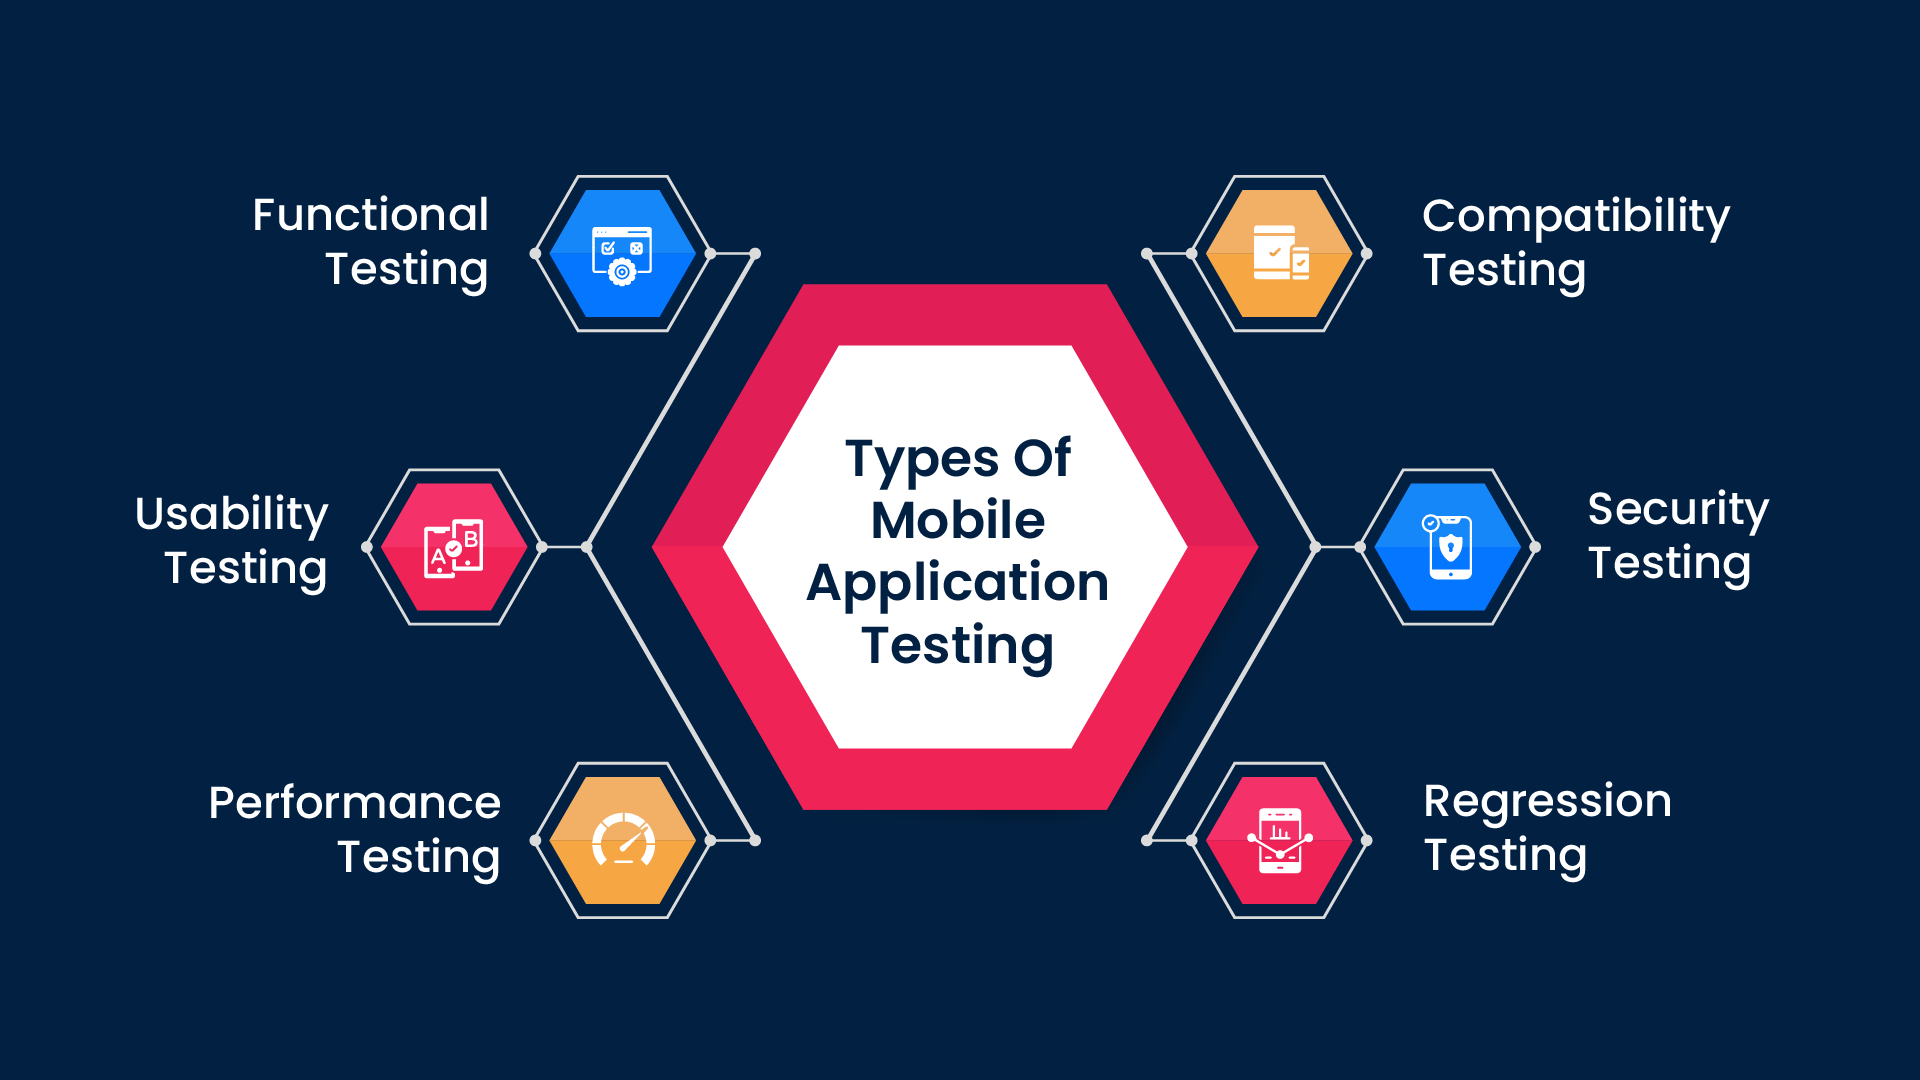 Types of mobile application testing